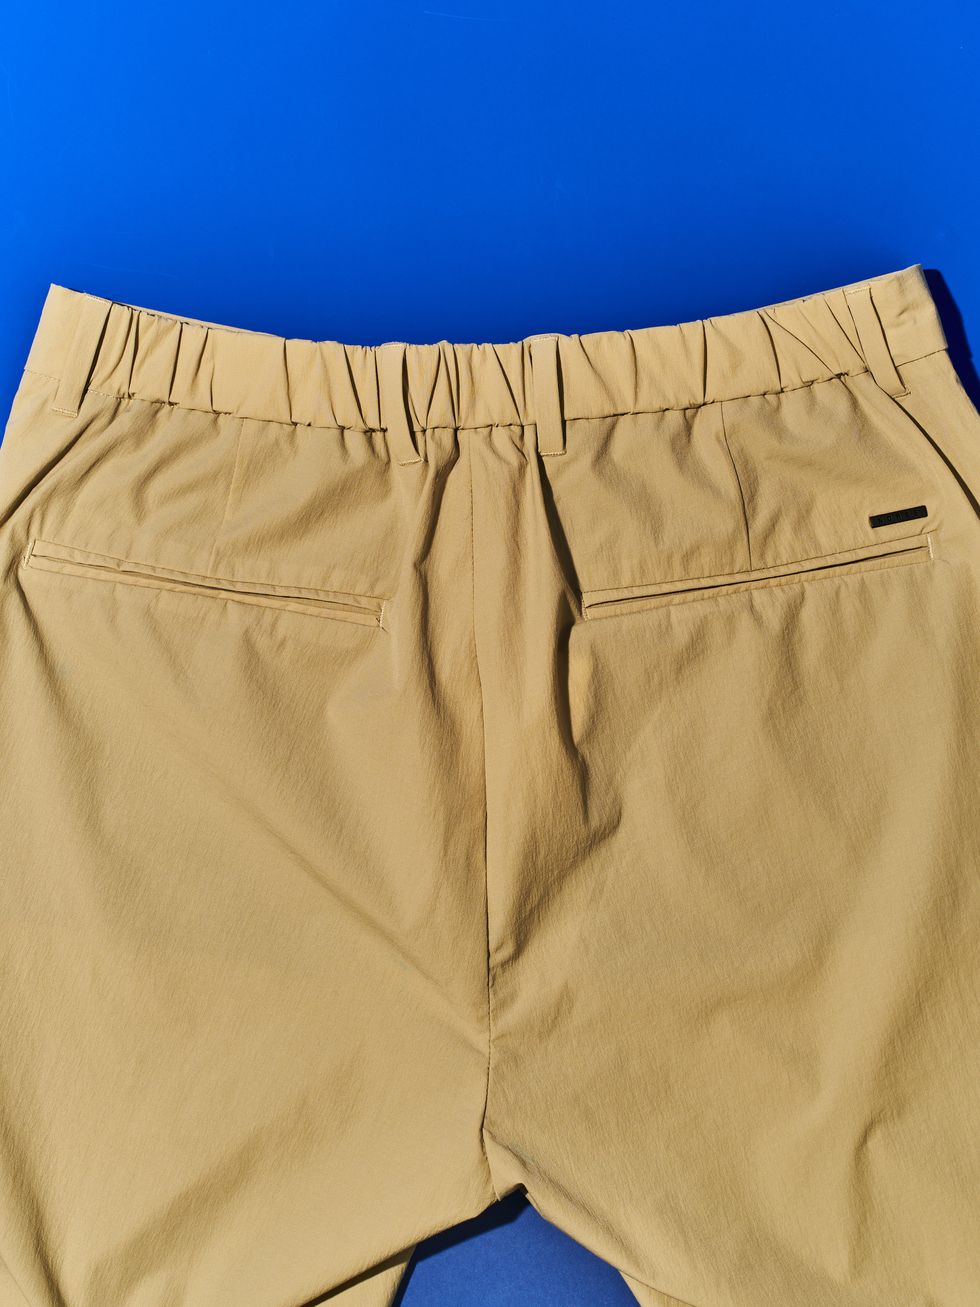 norse projects' travel pants are the only pair you'll ever need